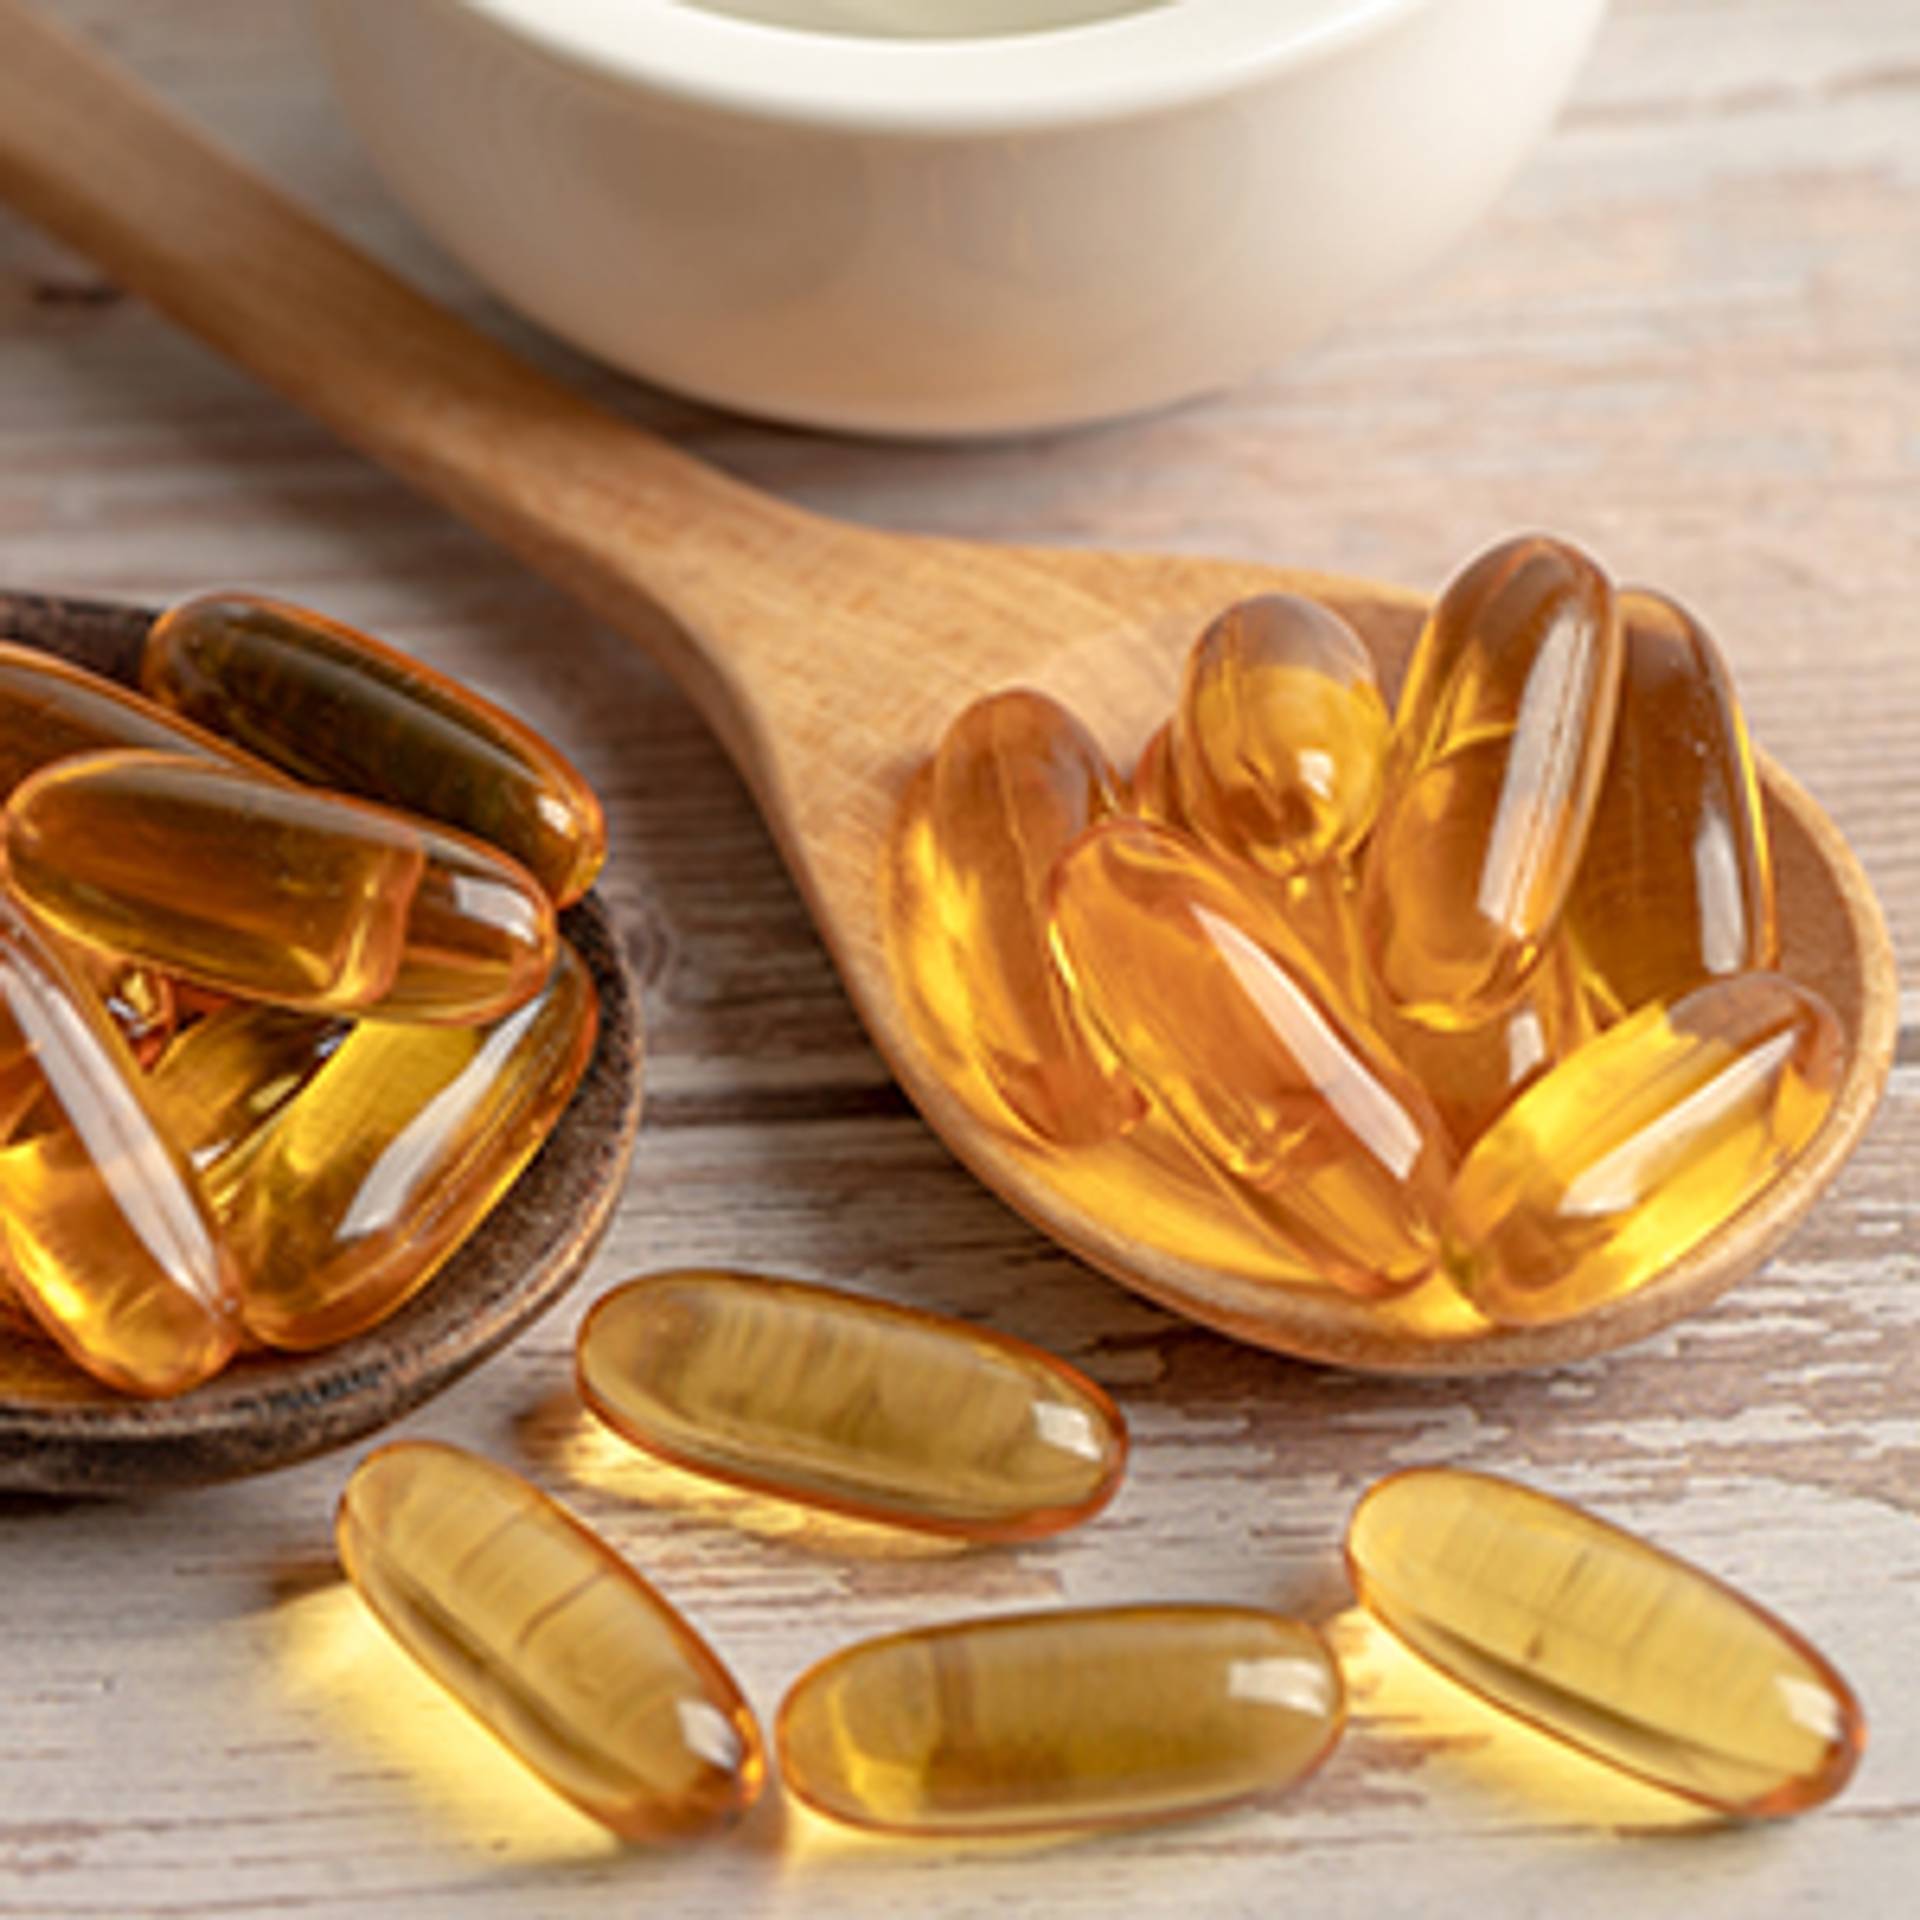 If you want to buy Omega 3, you can find out here what to consider here.